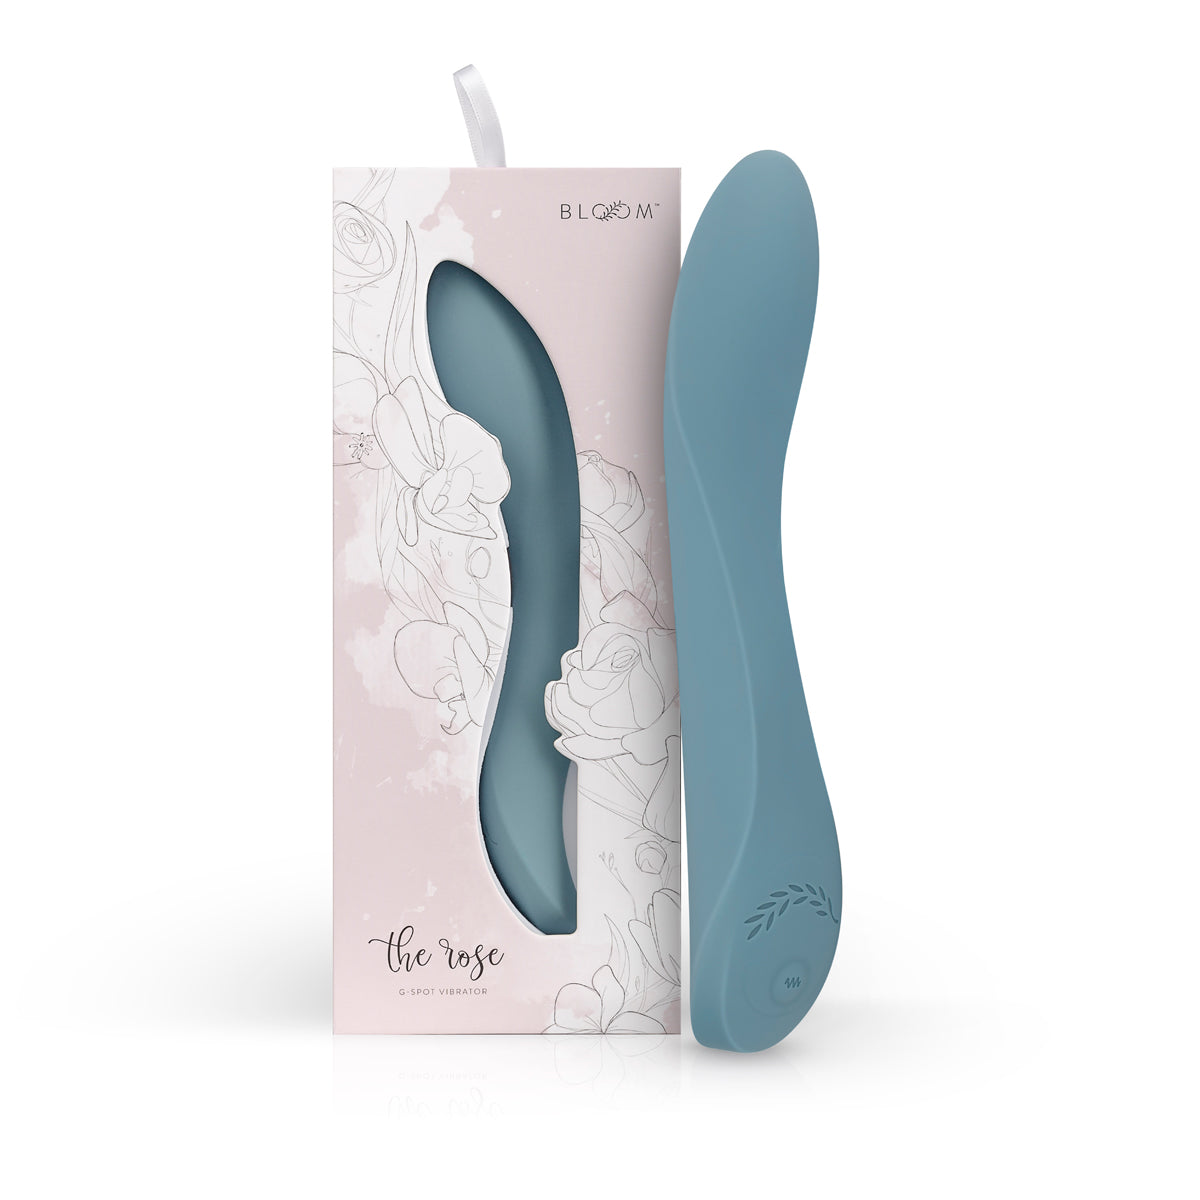 The Rechargeable Rose G-Spot Vibrator